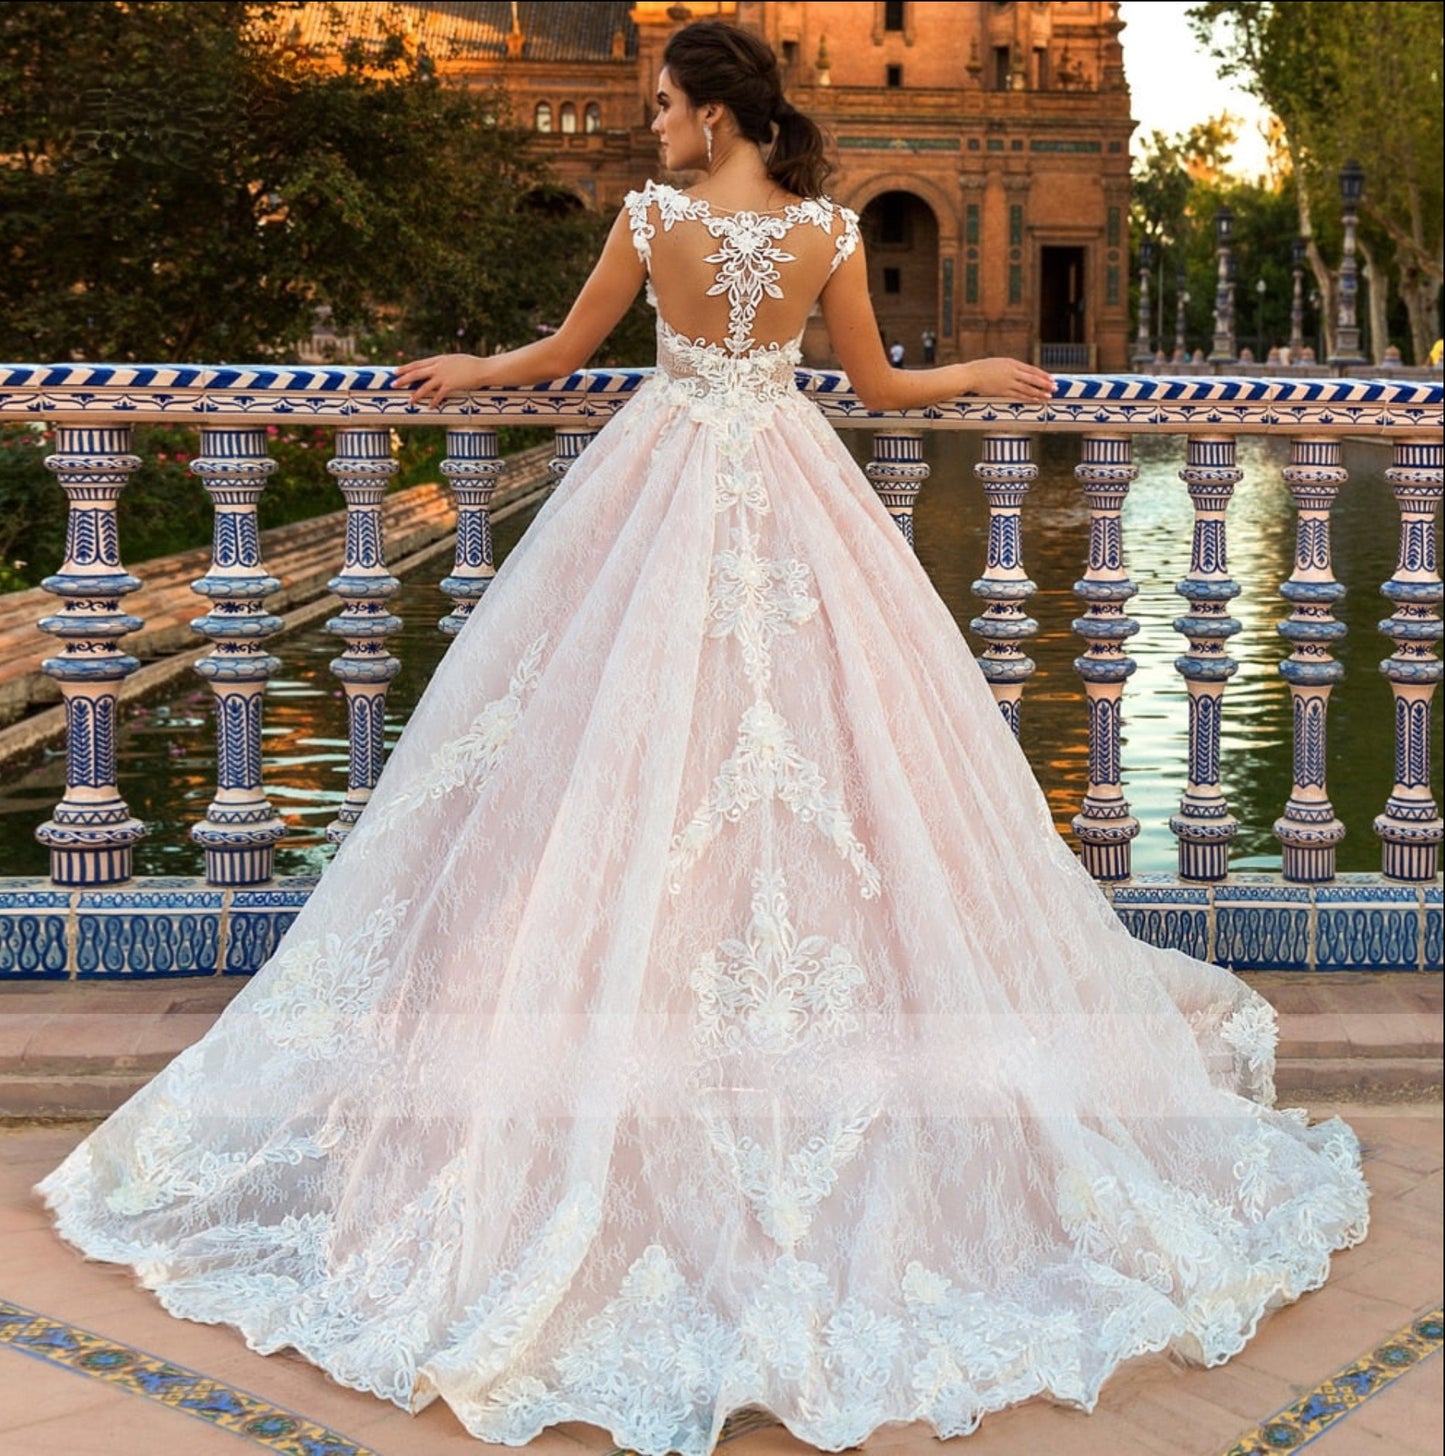 Luxurious Illusion Lace A-Line Wedding Bridal Ball Gown